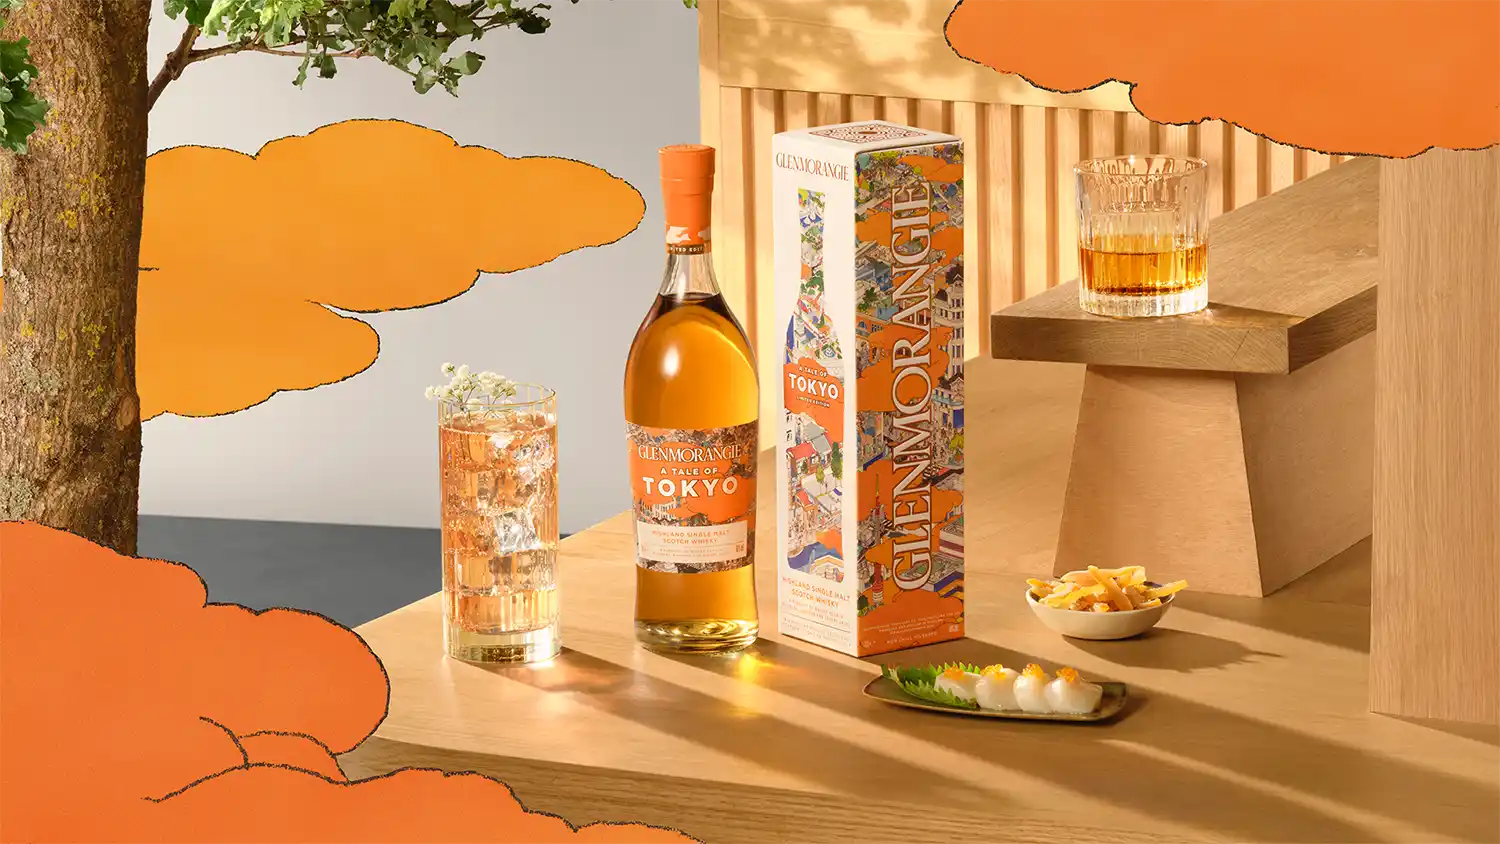 GLENMORANGIE LIMITED EDITION 2023 A TALE OF TOKYO KV PACK BOTTLE COCKTAILS 1920x1080 RGB veryhigh.width 9500x prop